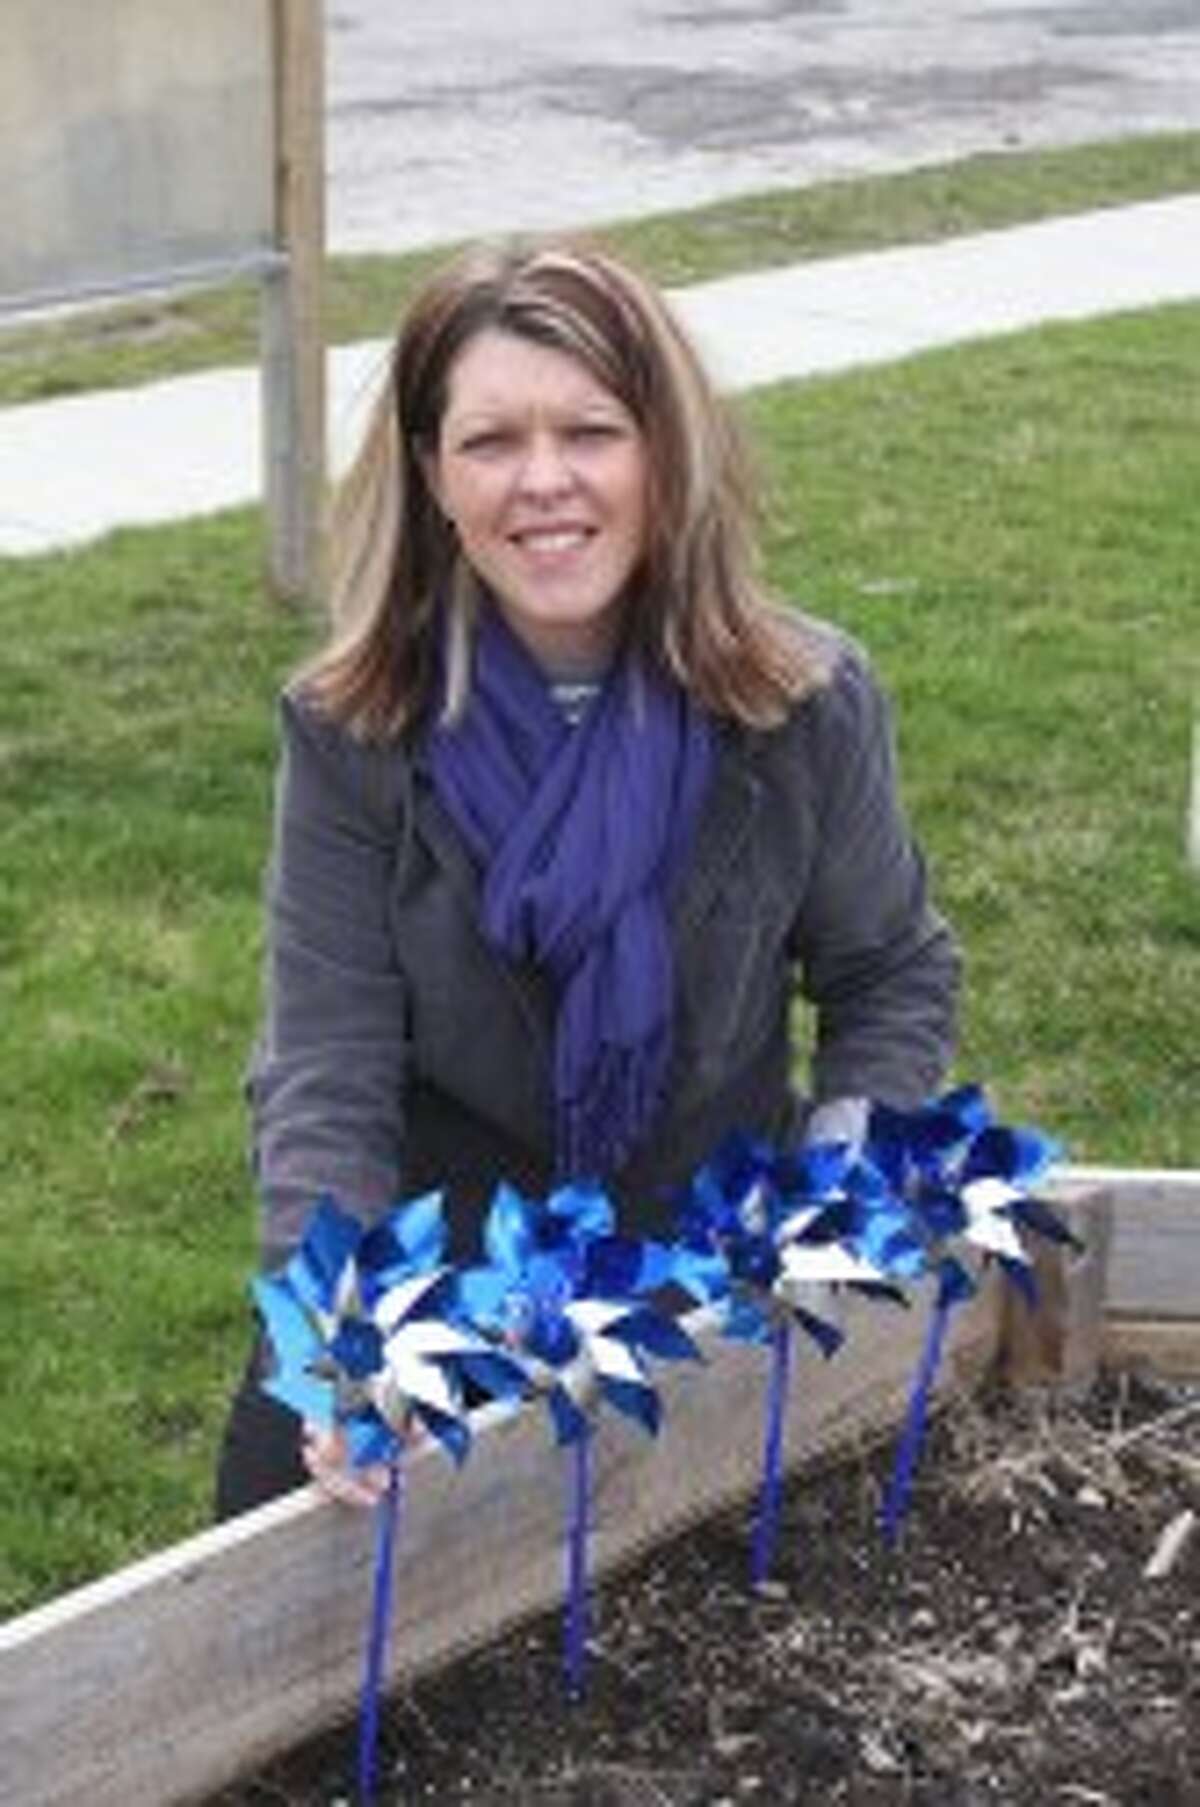 The Manistee Child Advocacy Center’s Traci Smith places some of the blue pinwheels that are various locations around town for the Pinwheels for Prevention program and Child Abuse Prevention Month. The center is sponsoring a walk at 1 p.m. on Sunday, April 28 as a fundraiser for the Manistee Child Advocacy Center.(Ken Grabowski/News Advocate)